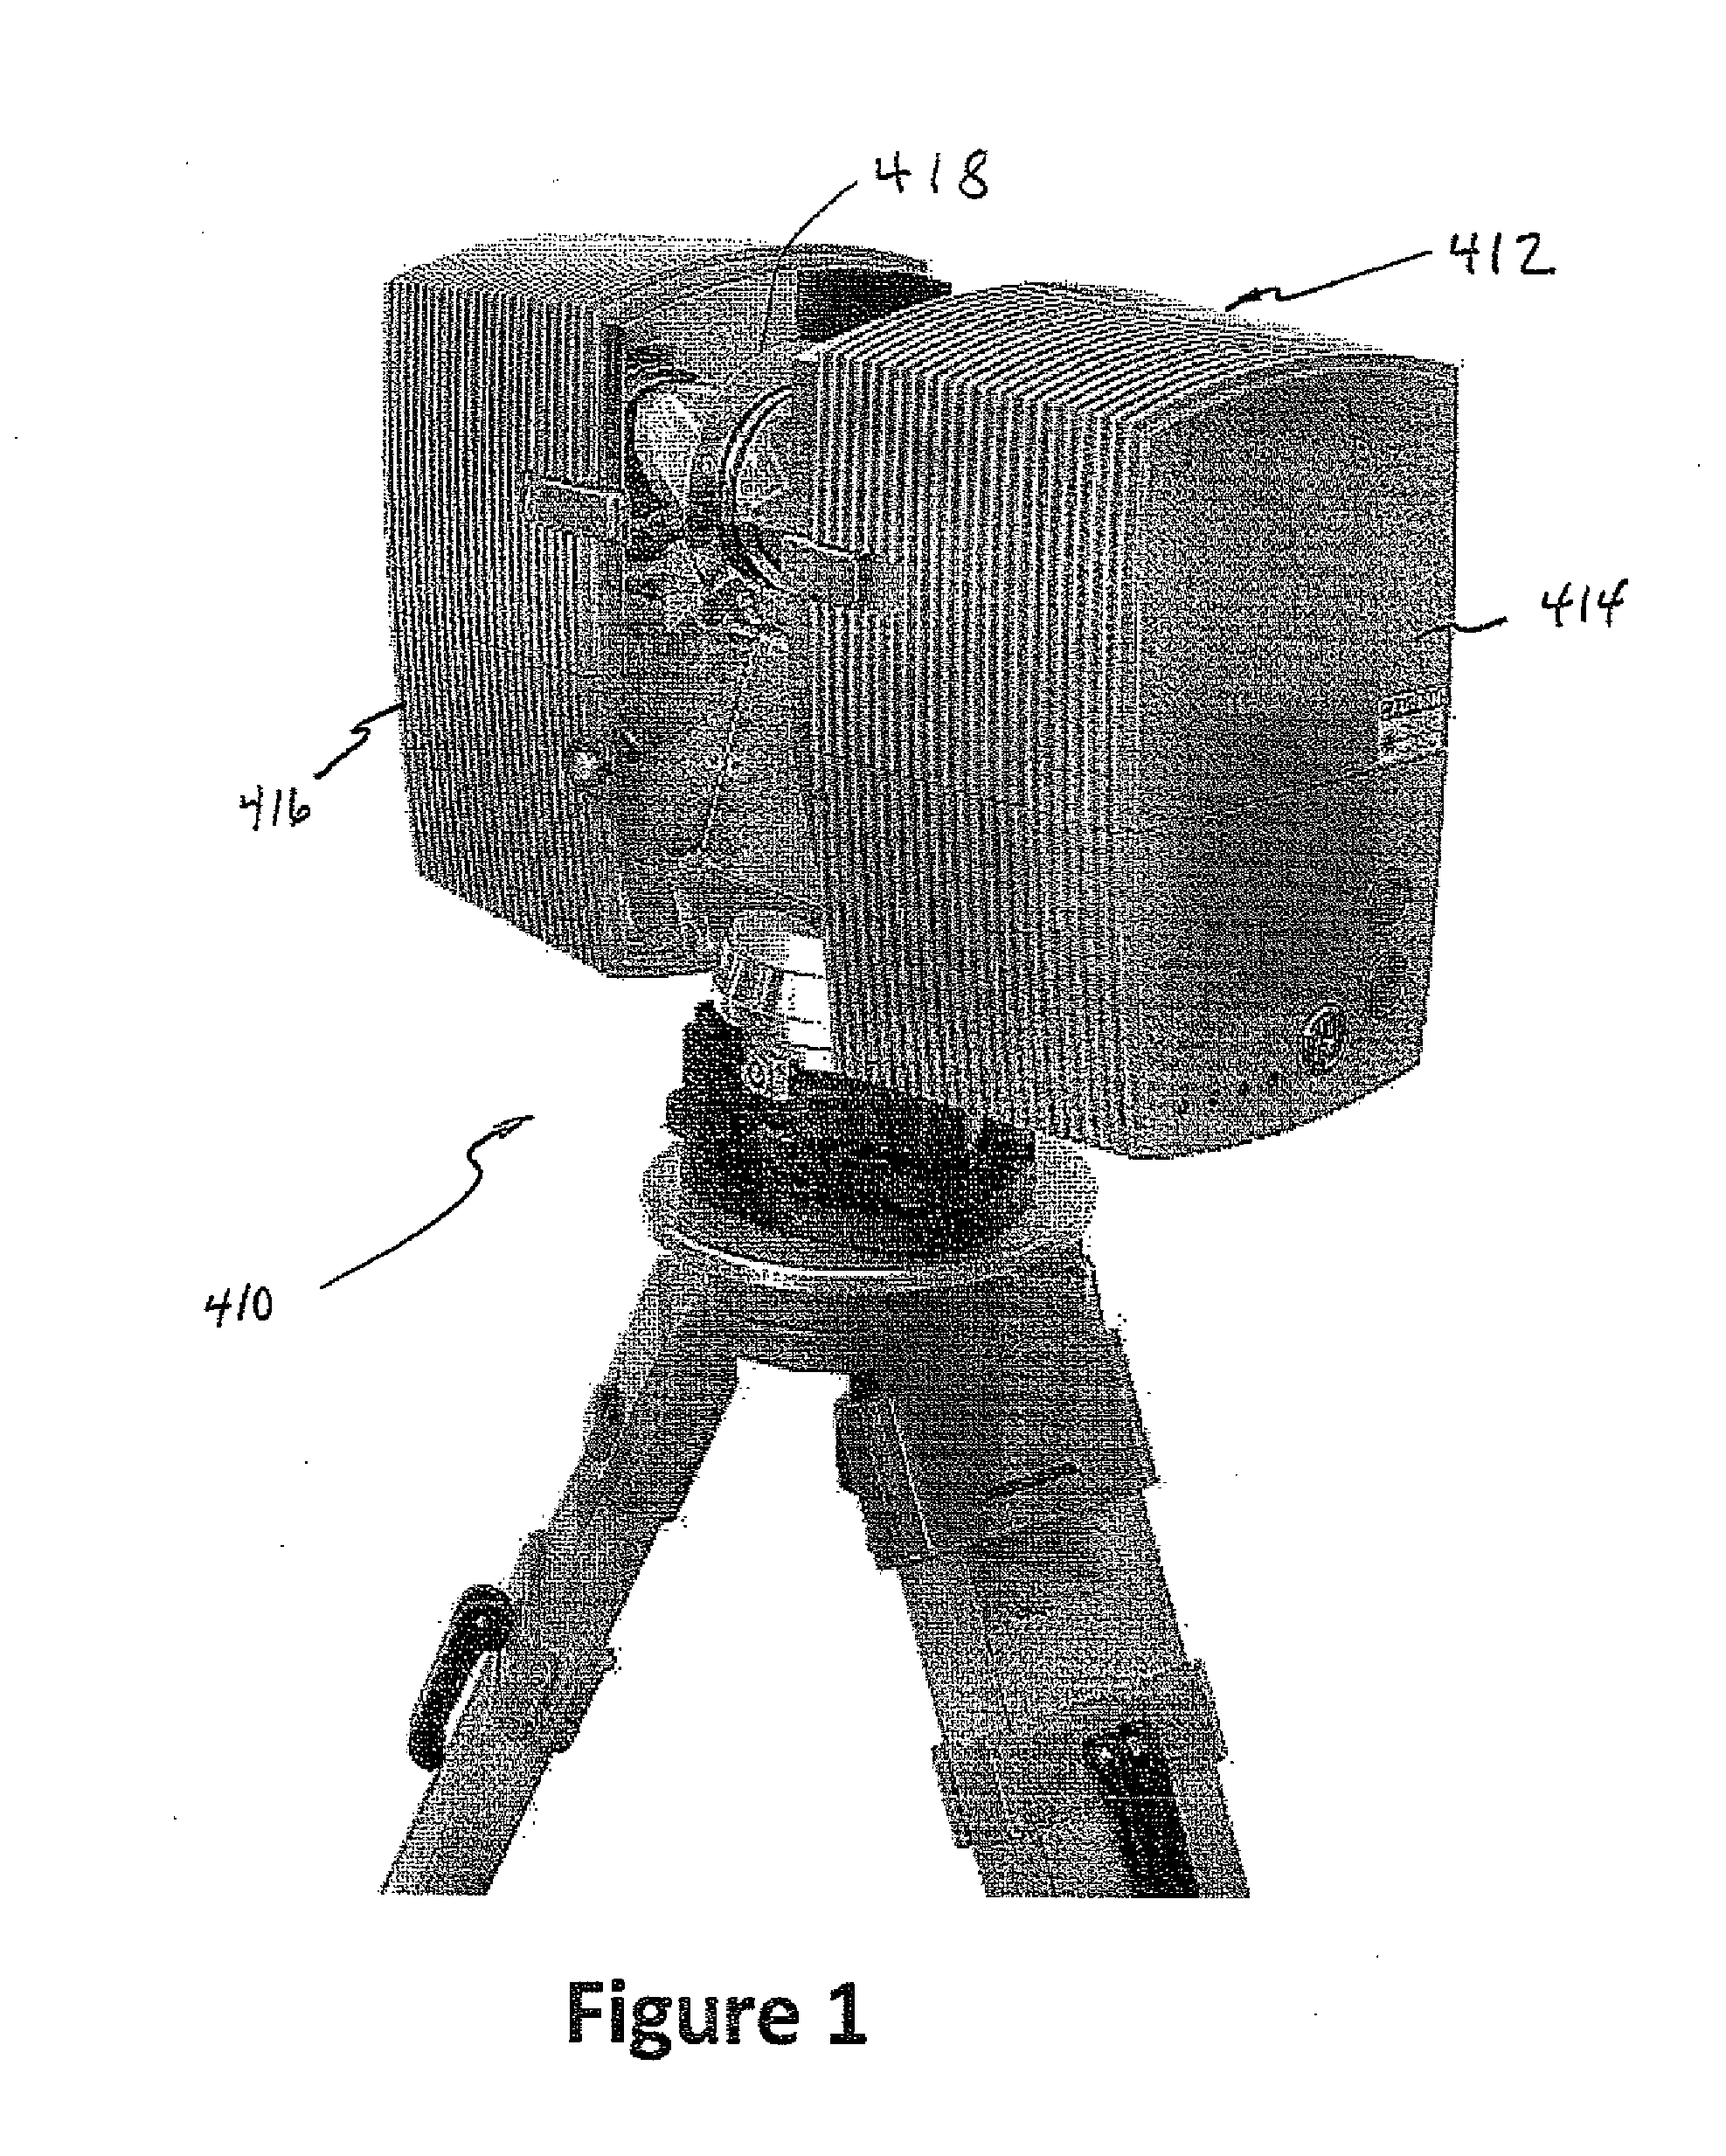 Method of generating a smooth image from point cloud data